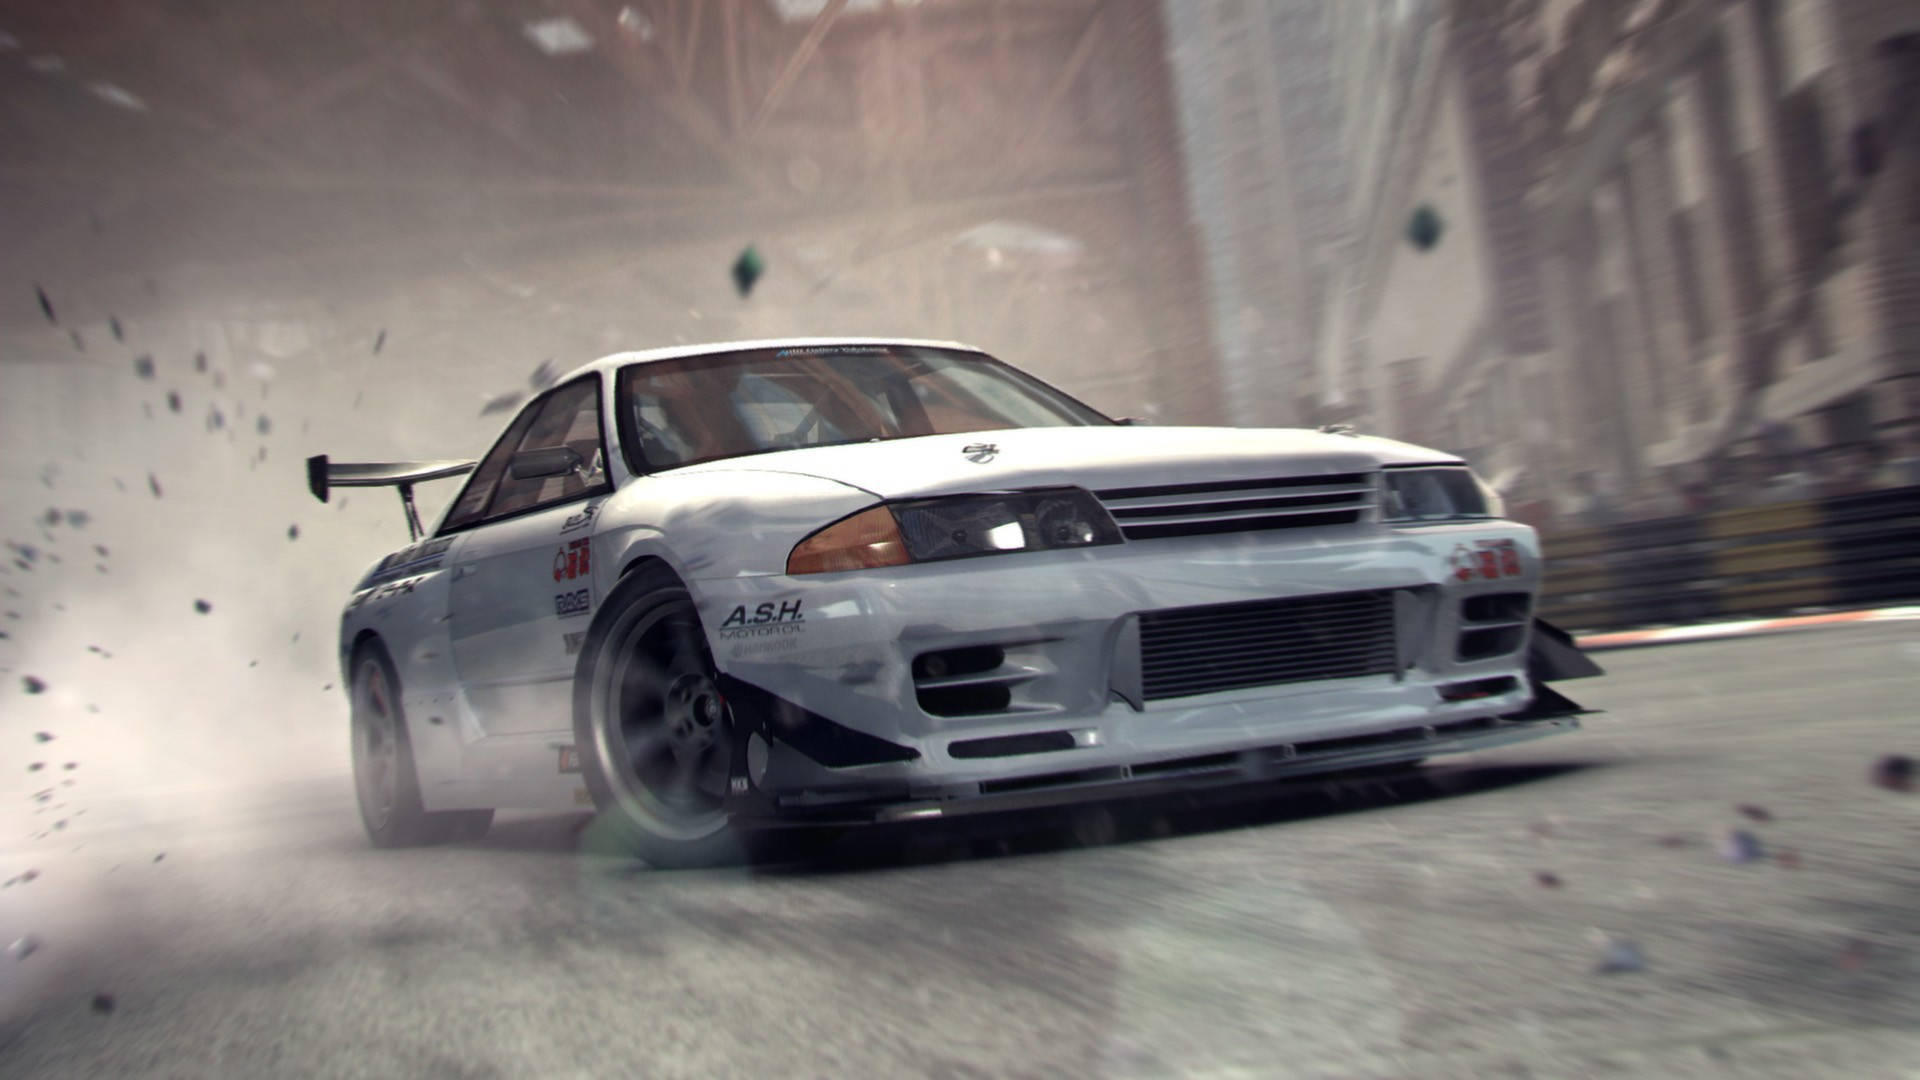 Caption: Exhilarating Ride In Grid 2 - Classic White Race Car Background